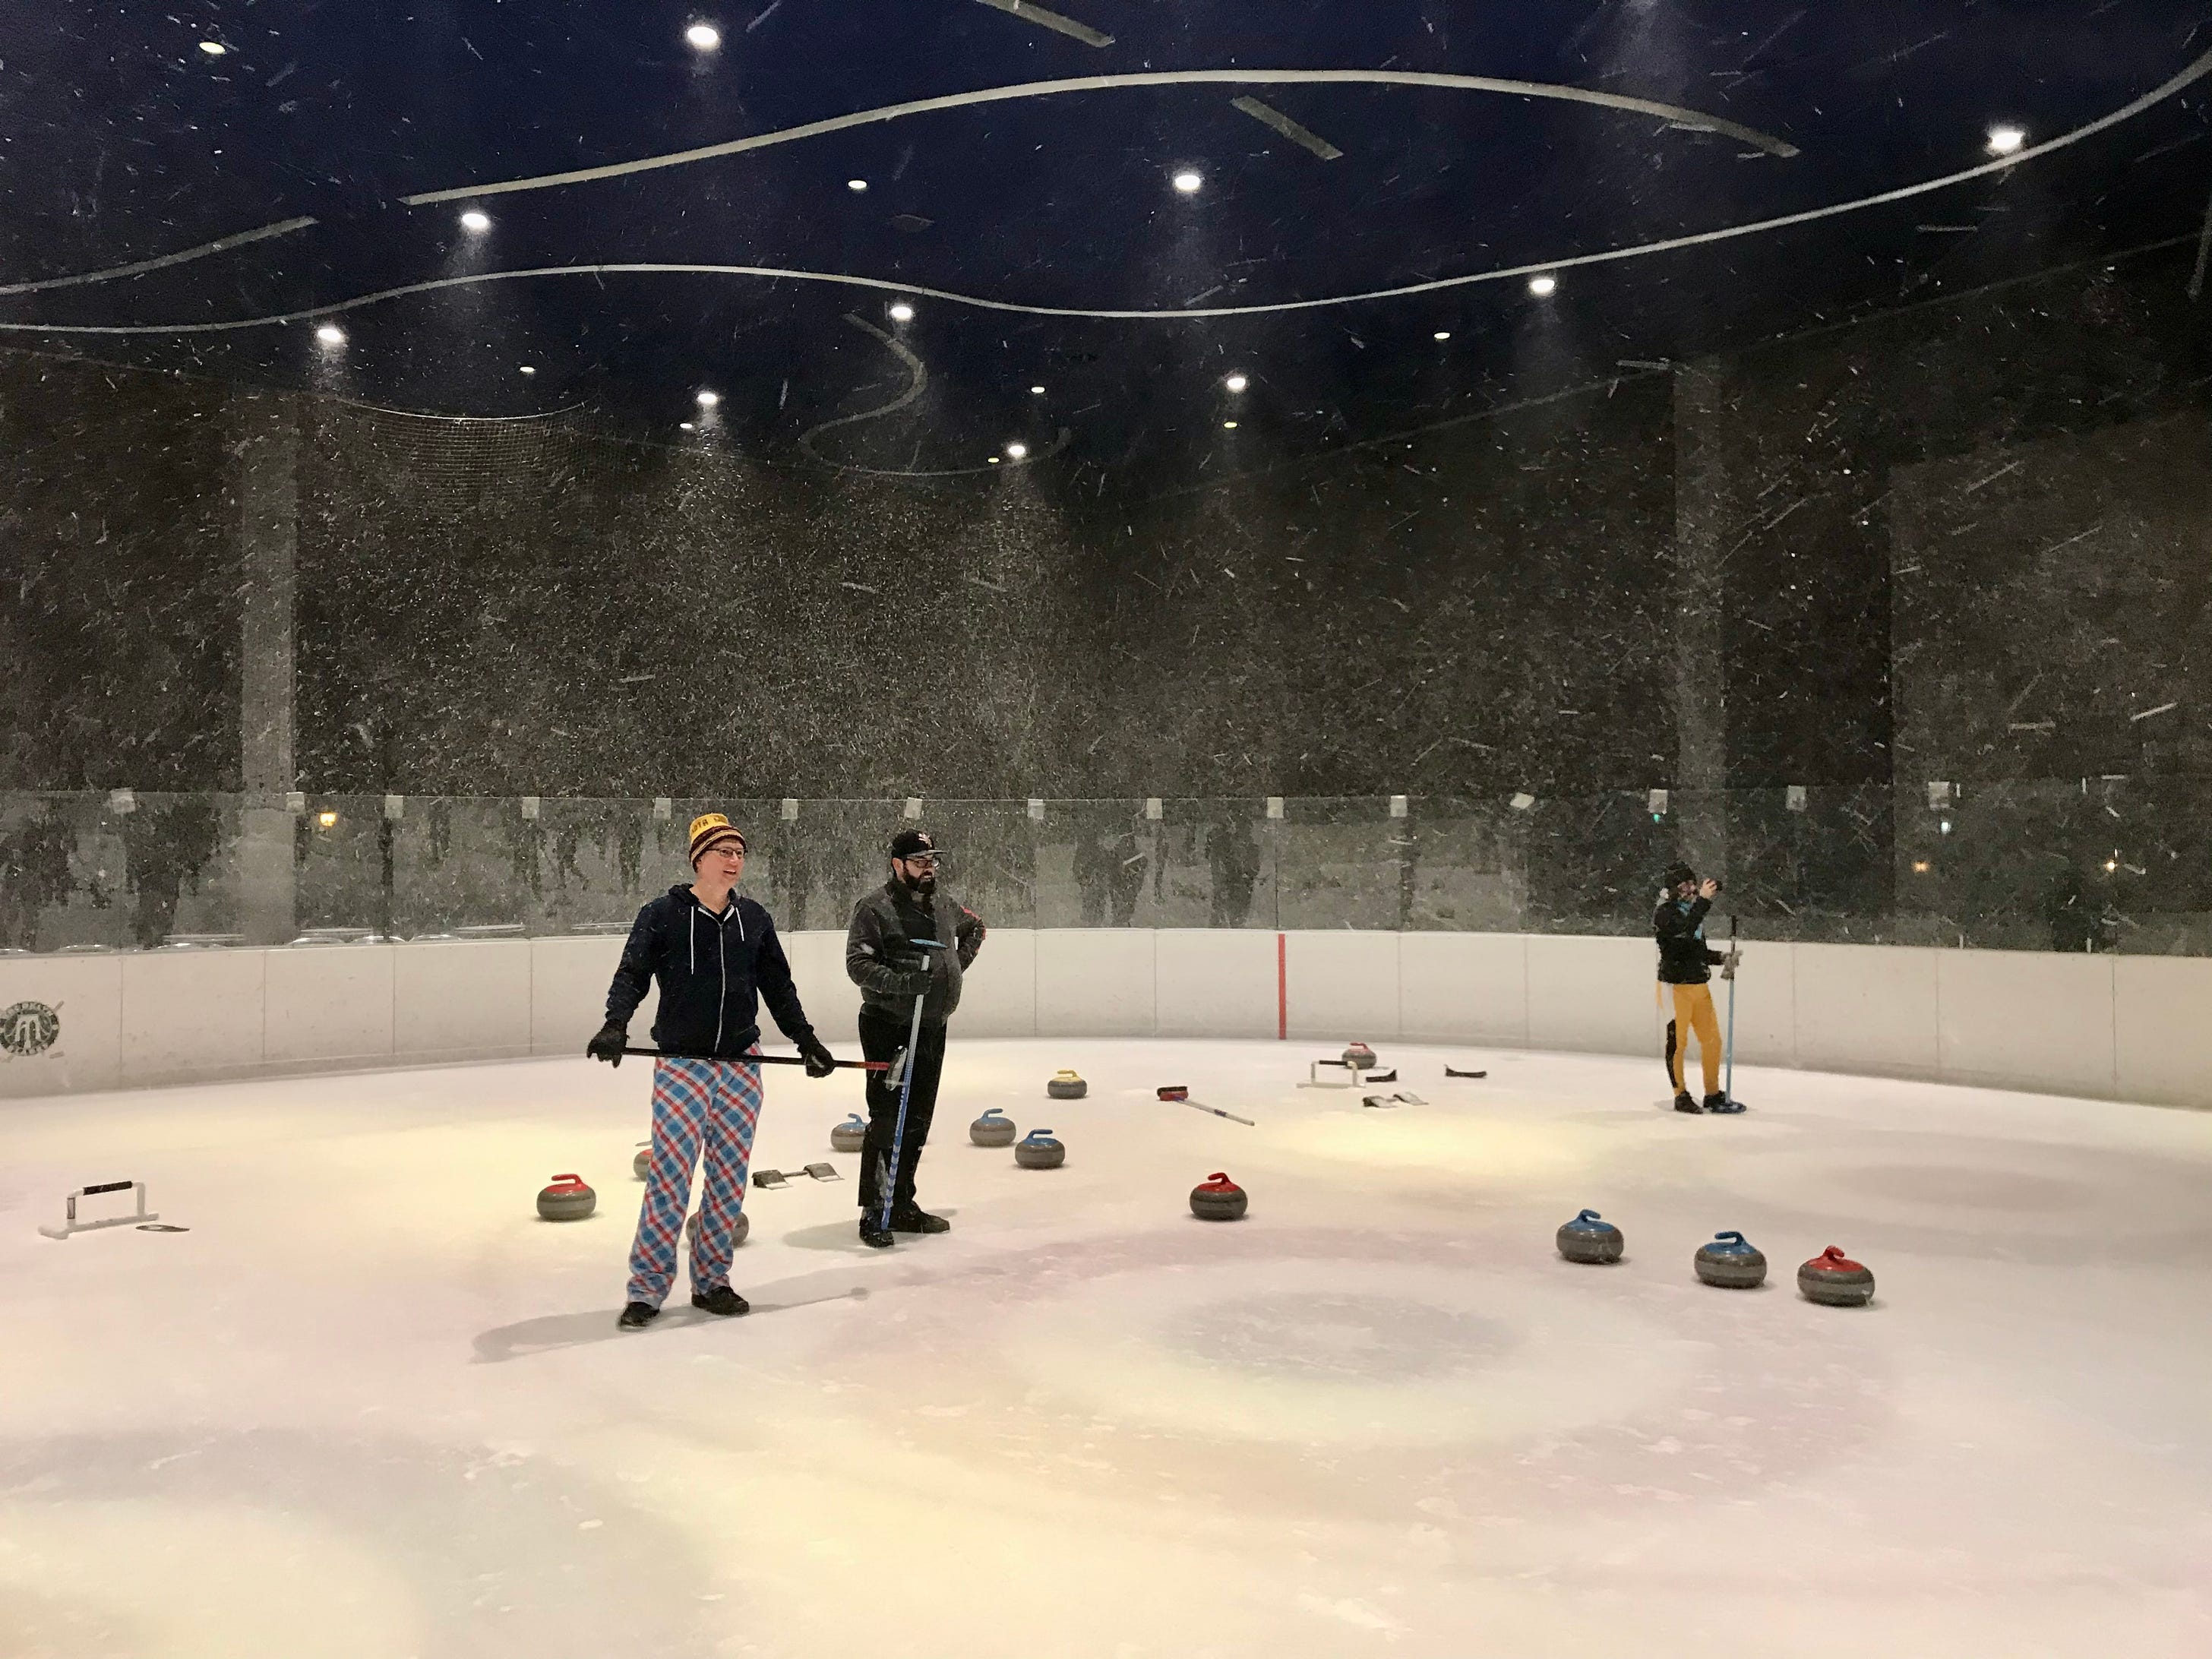 Three curlers stand on an ice rink, surrounded by curling stones, as a snowstorm rages around them.